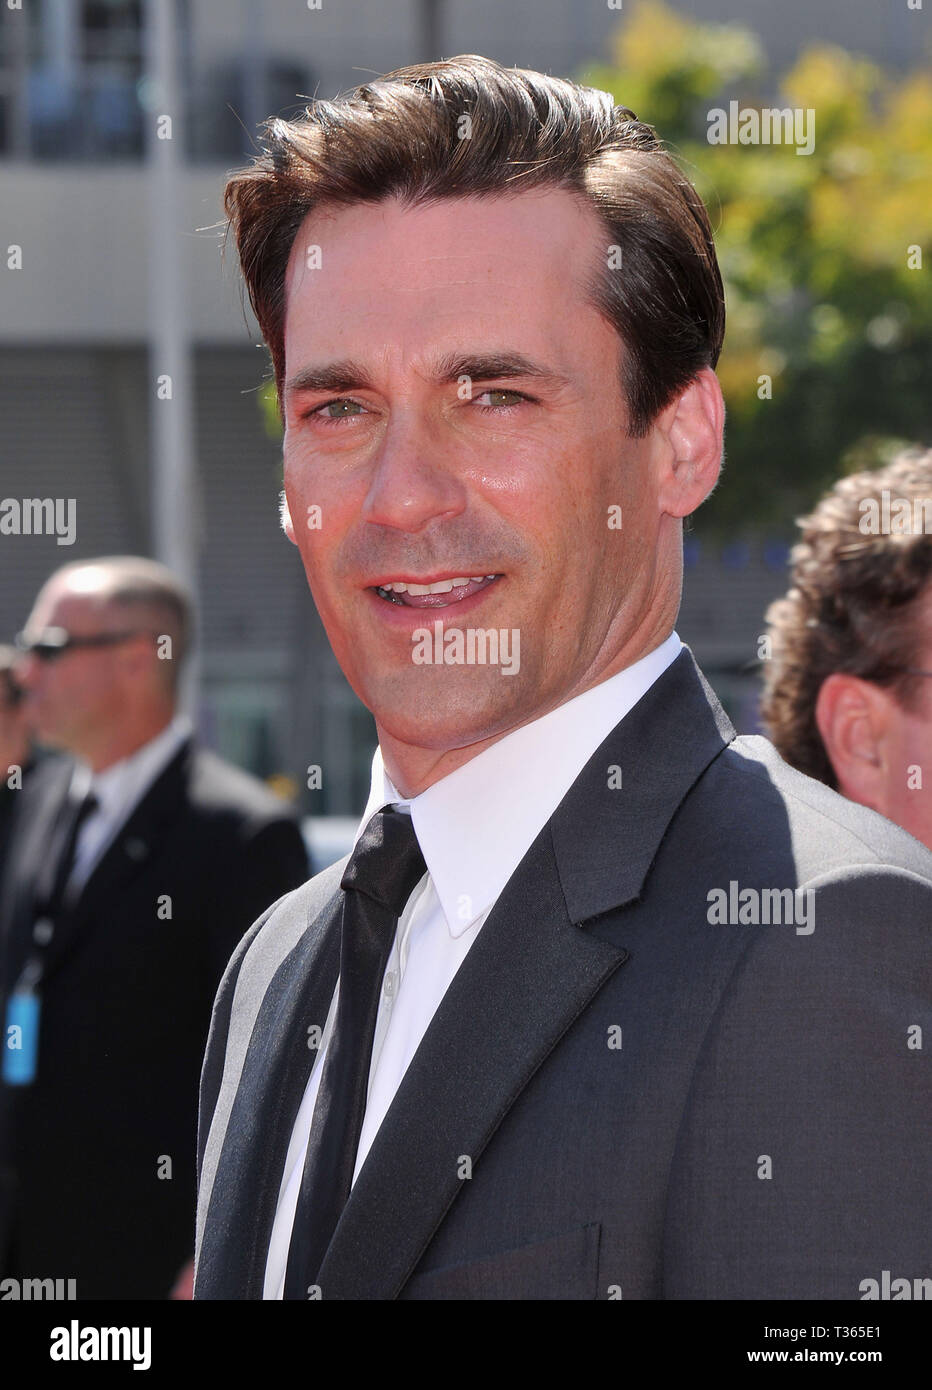 Jon Hamm - 2009 Creatives Arts Emmys Awards at the Nokia Theatre In Los Angeles.05 HammJon 05 Red Carpet Event, Vertical, USA, Film Industry, Celebrities,  Photography, Bestof, Arts Culture and Entertainment, Topix Celebrities fashion /  Vertical, Best of, Event in Hollywood Life - California,  Red Carpet and backstage, USA, Film Industry, Celebrities,  movie celebrities, TV celebrities, Music celebrities, Photography, Bestof, Arts Culture and Entertainment,  Topix, headshot, vertical, one person,, from the year , 2009, inquiry tsuni@Gamma-USA.com Stock Photo